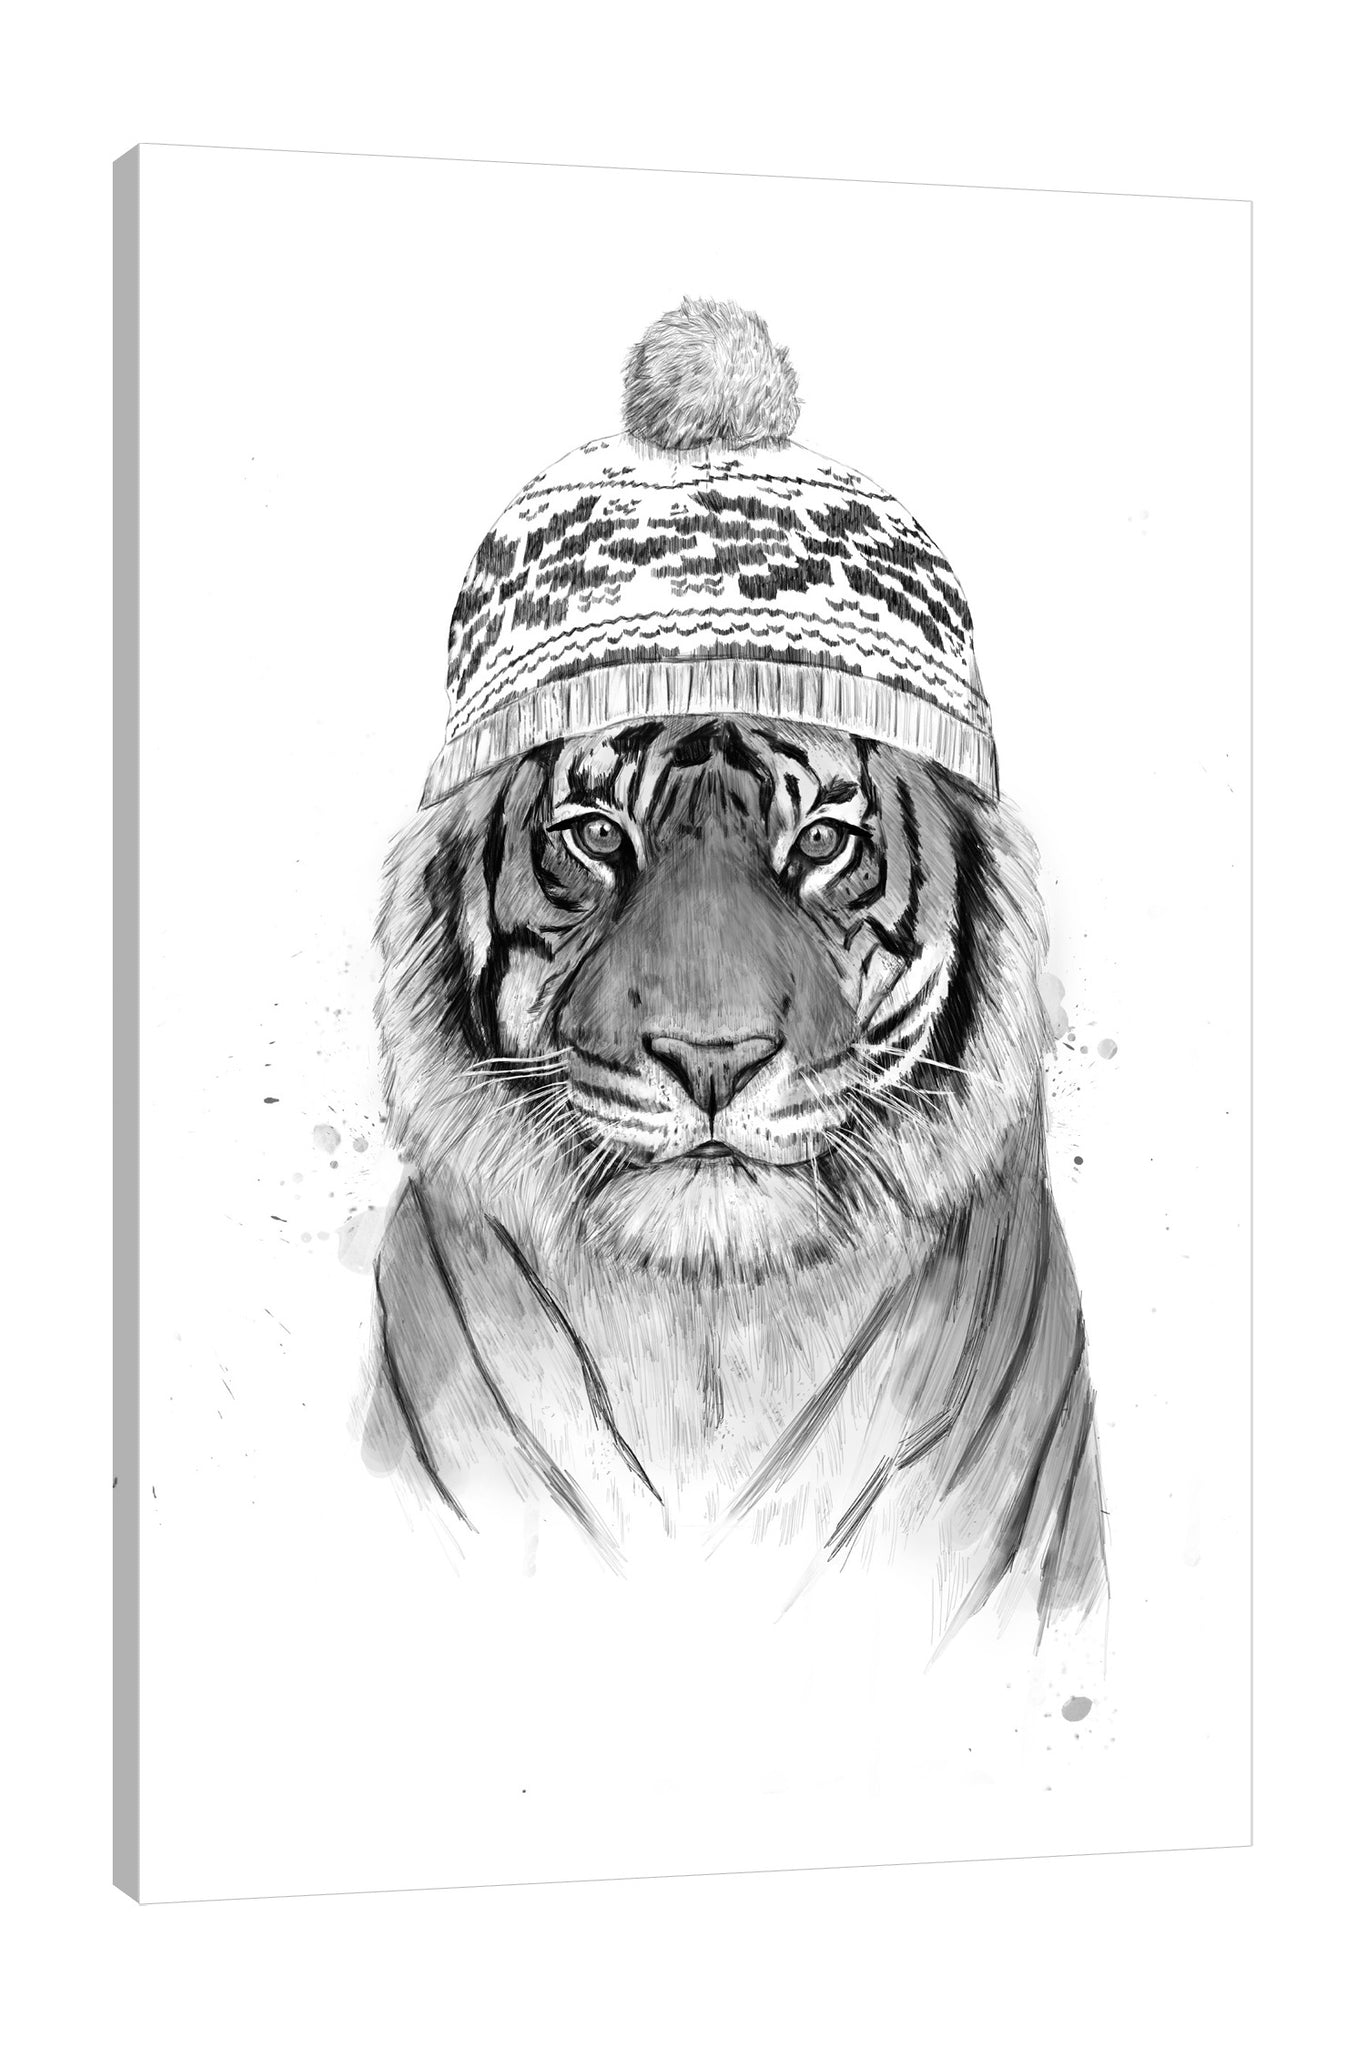 Balazs-Solti,Modern & Contemporary,Animals,animals,animal,tiger,tigers,siberian tiger,siberian tigers,hats,hat,winter,black and white,Green,Salmon Pink,Red,White,Gray